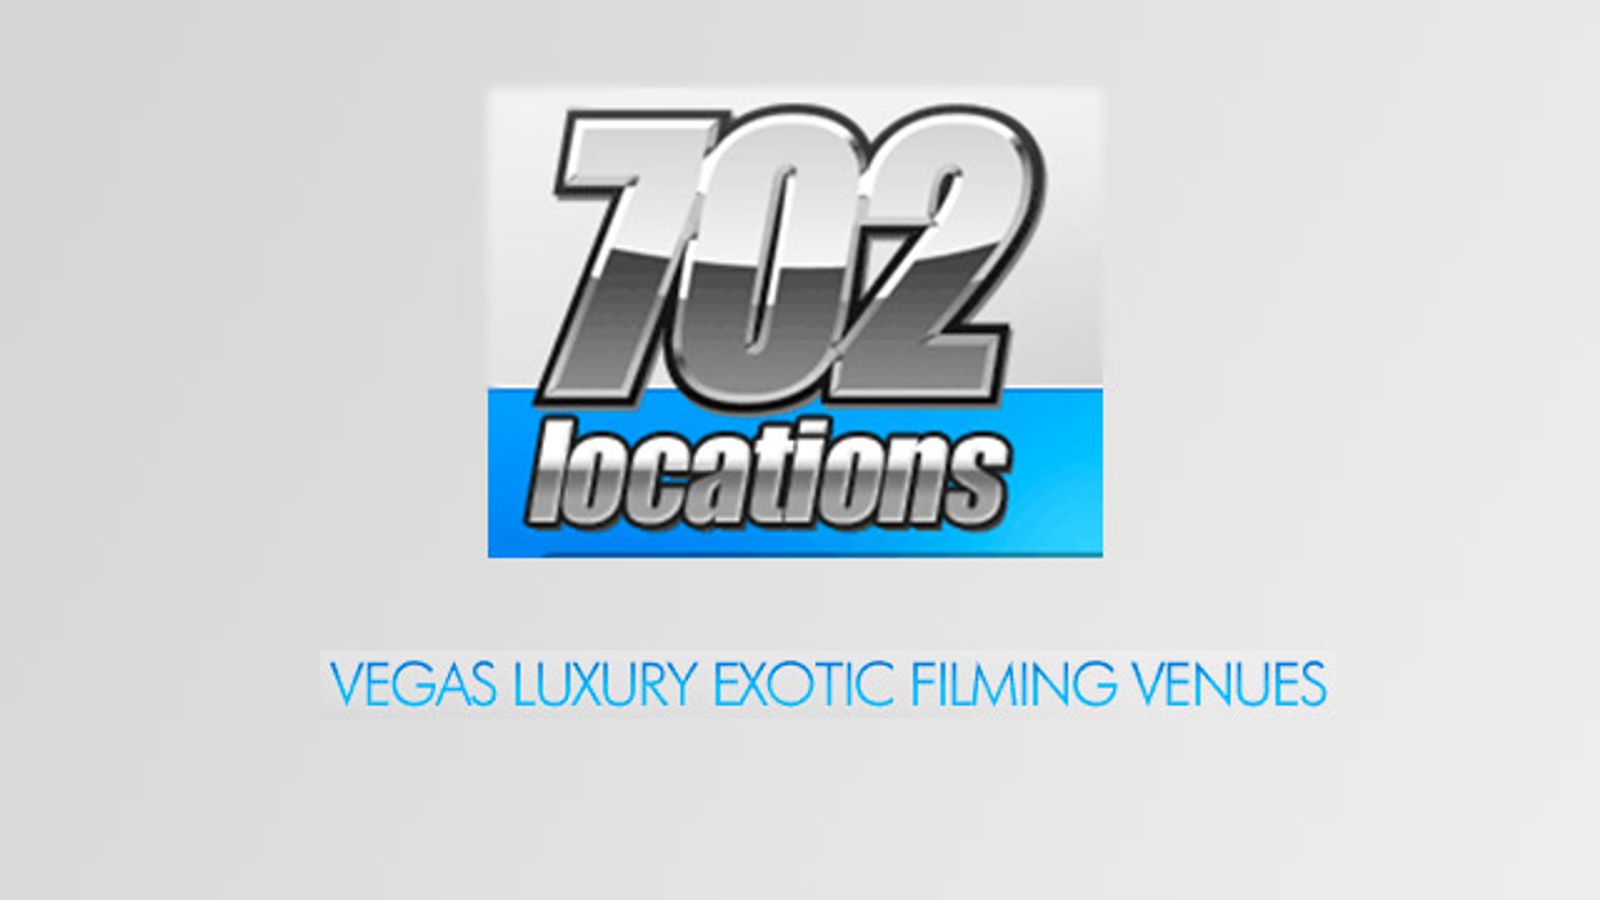 702 Locations Offers Filming Venues in Vegas for AEE & Beyond